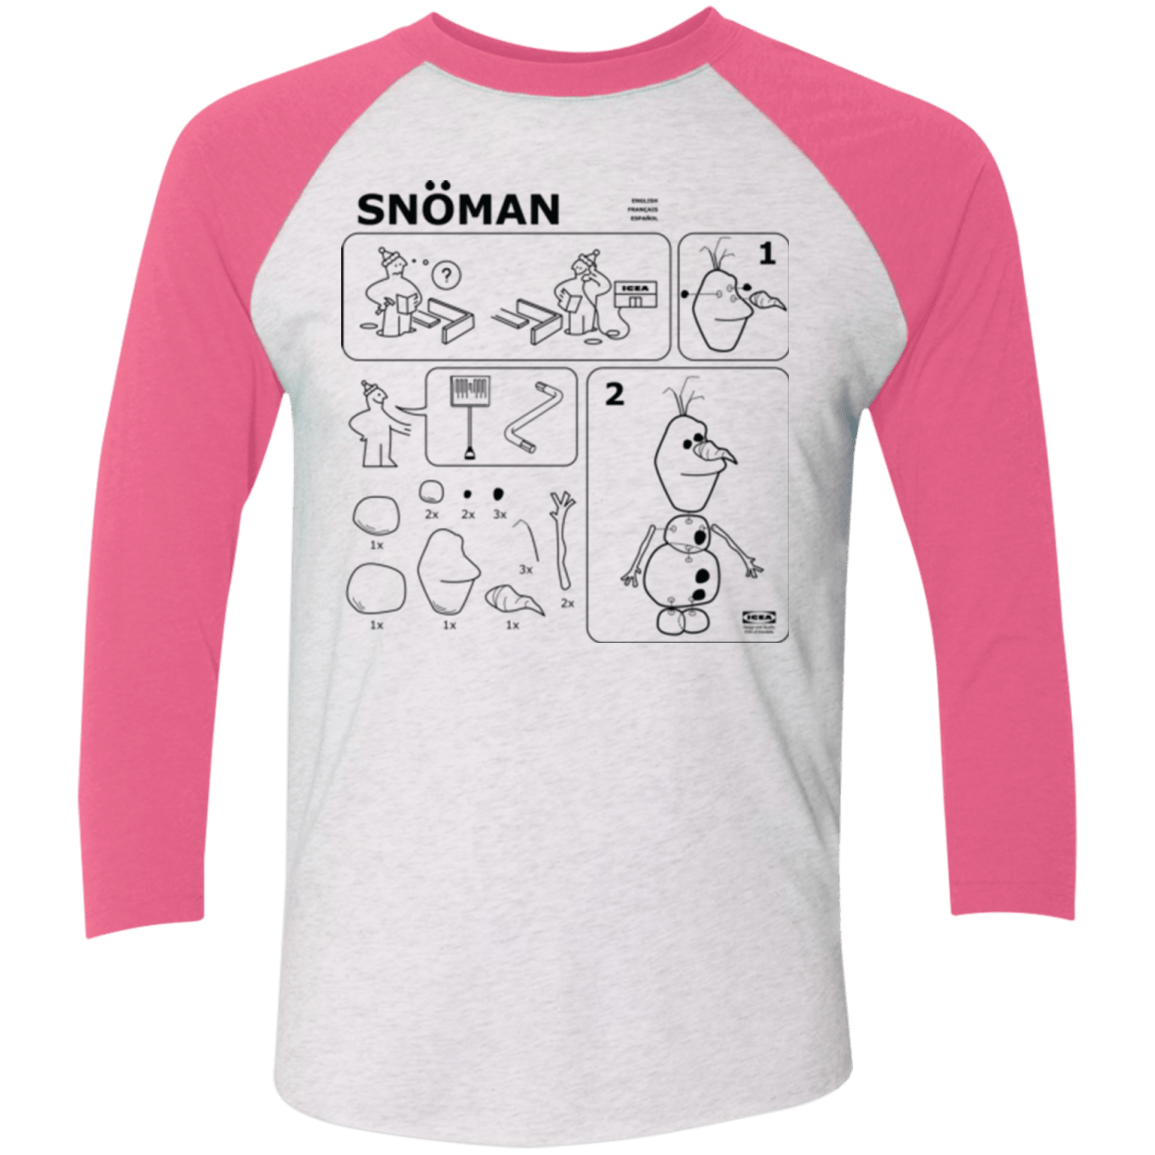 T-Shirts Heather White/Vintage Pink / X-Small Build a Snowman Men's Triblend 3/4 Sleeve